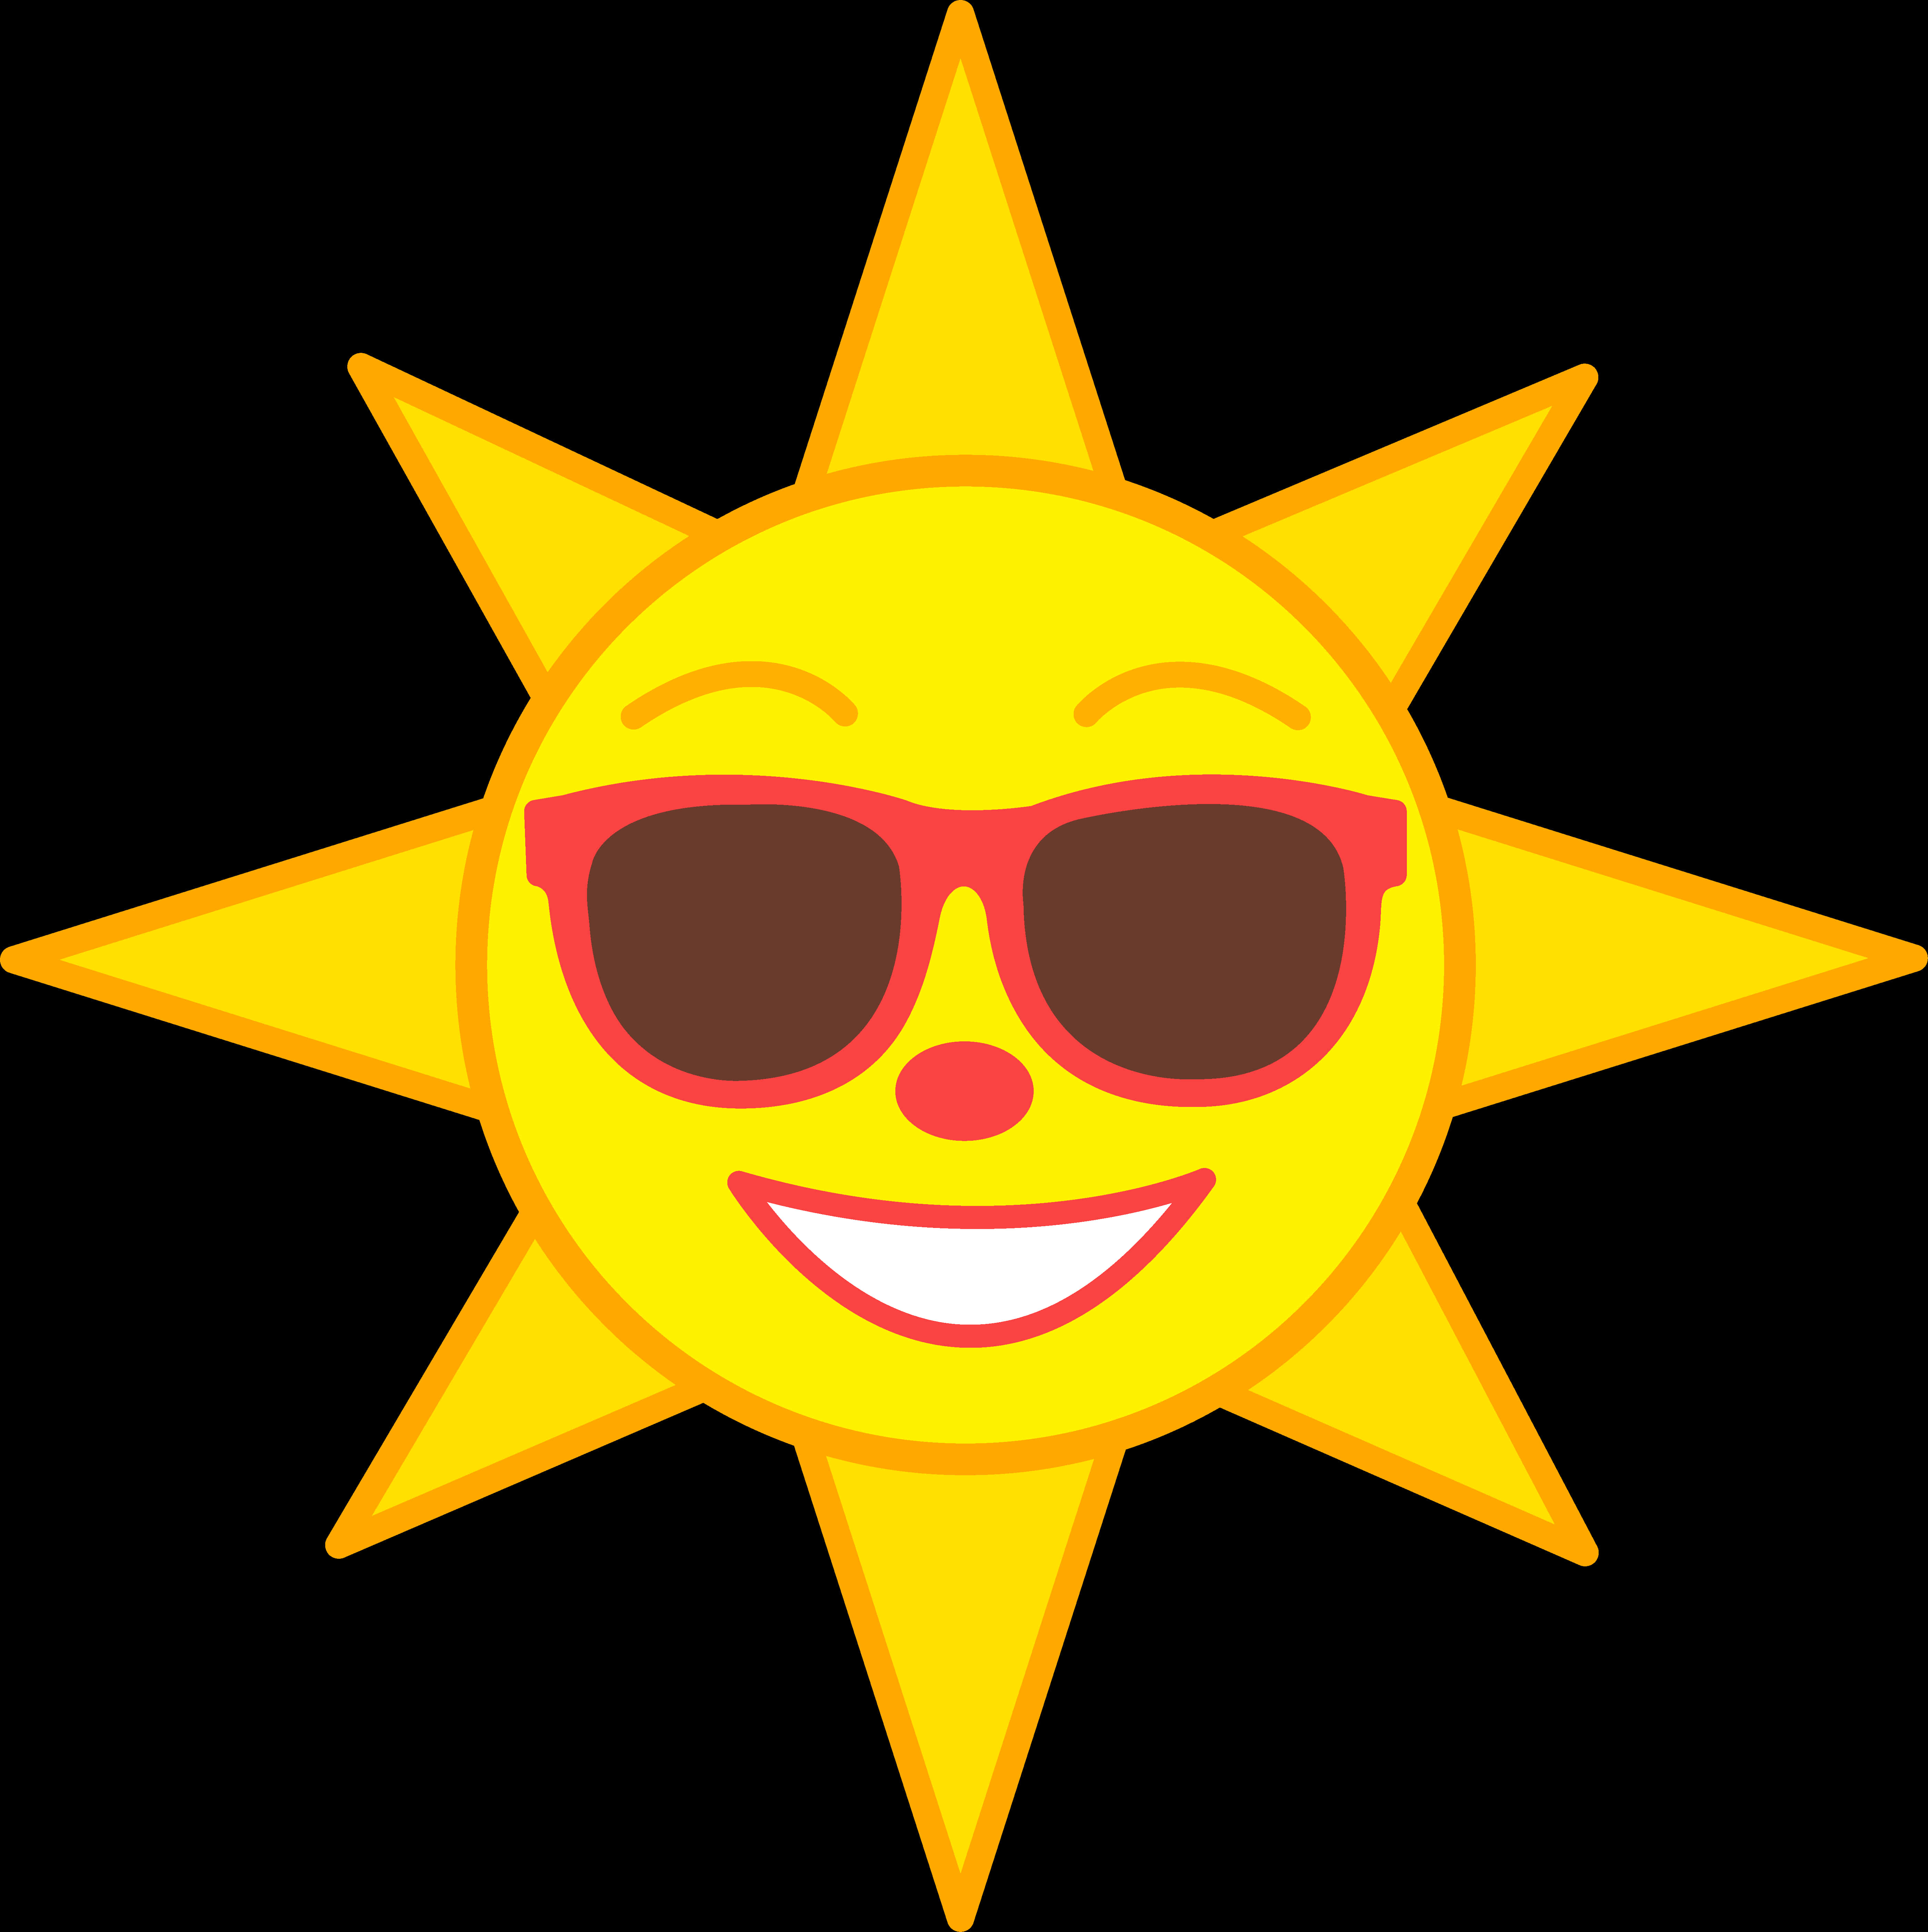 Smiling Sun With Sunglasses Transparent Background PNG image